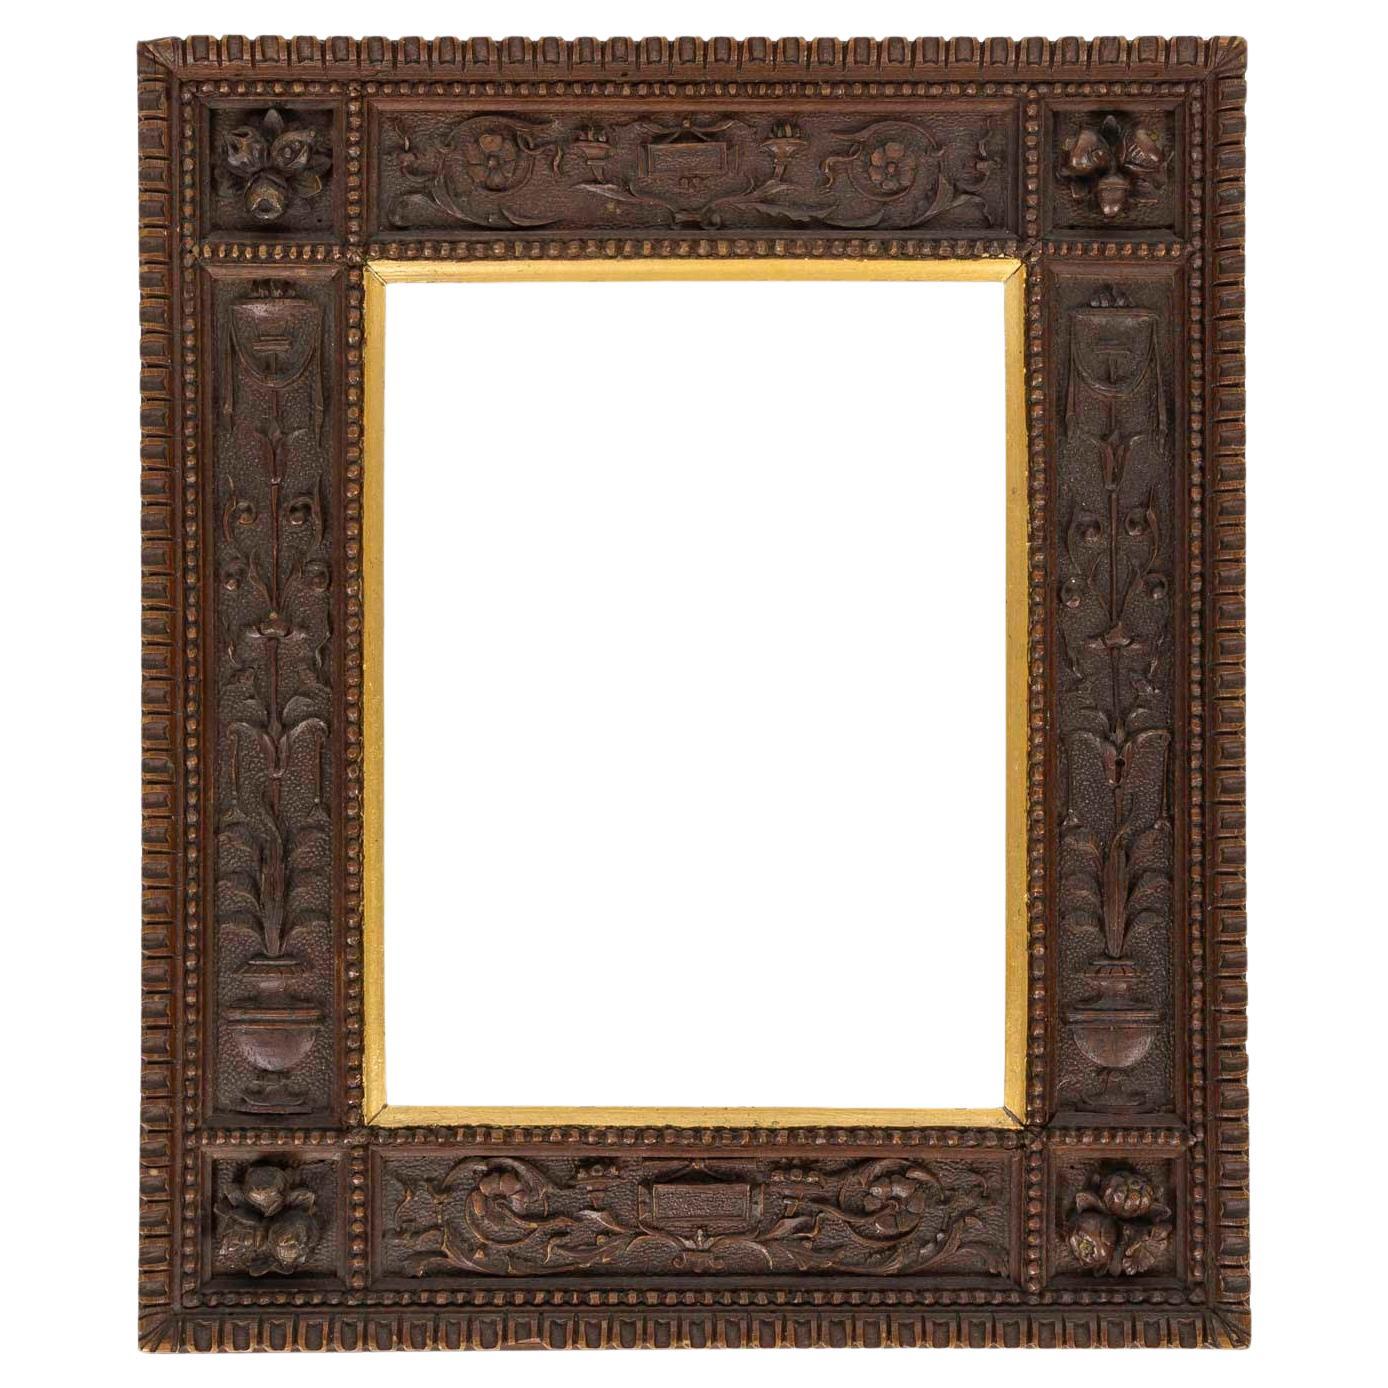 Italian Renaissance Style Frame in Finely Carved Wood, Partially Gilded. For Sale